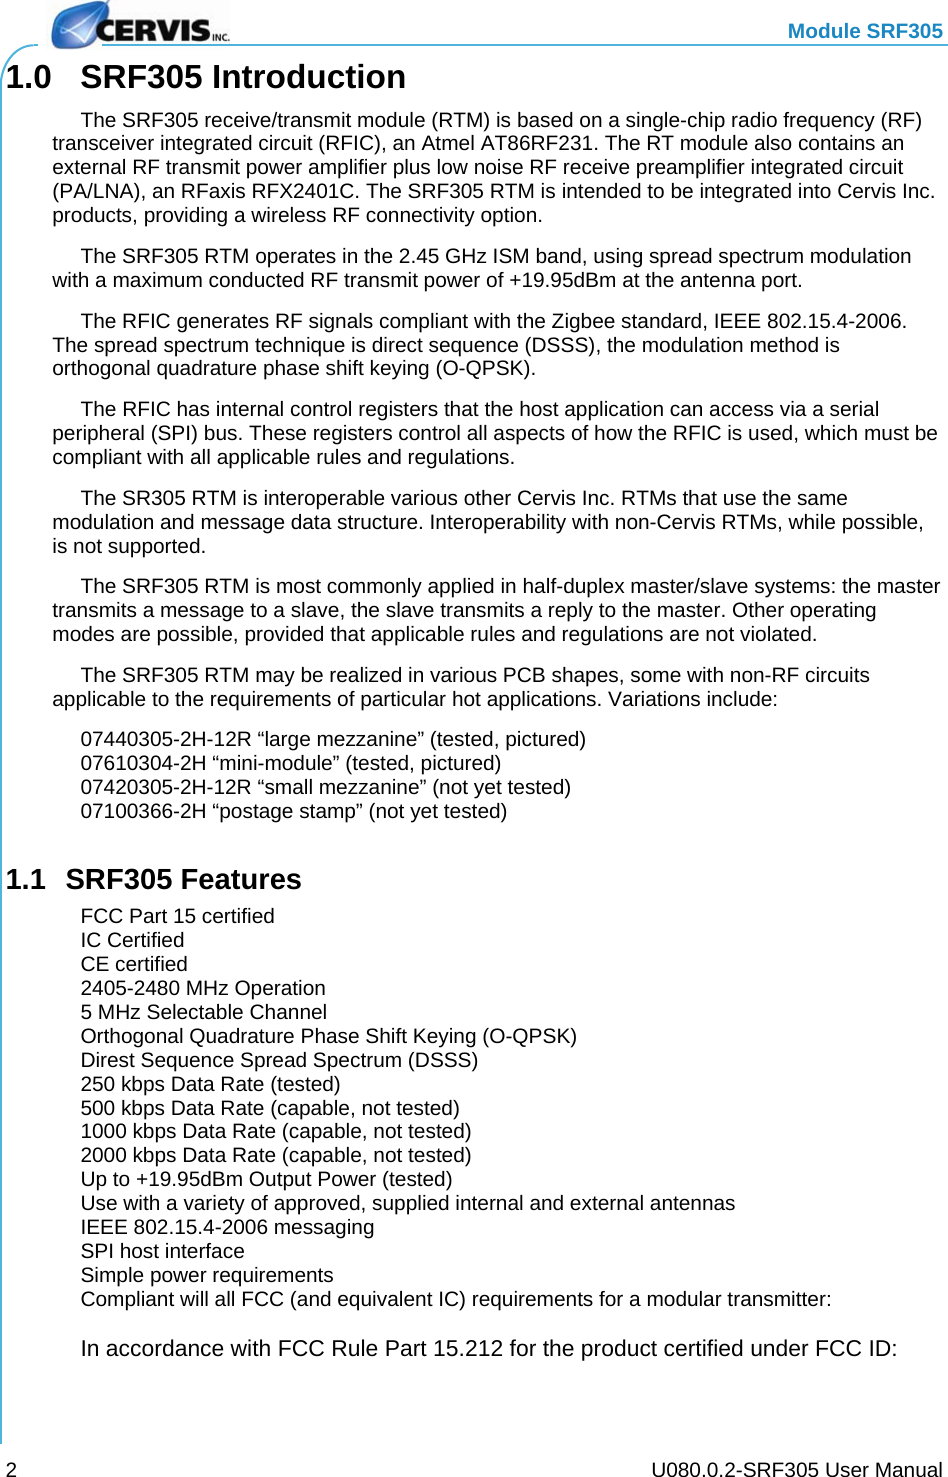   Module SRF305     U080.0.2-SRF305 User Manual 21.0 SRF305 Introduction   The SRF305 receive/transmit module (RTM) is based on a single-chip radio frequency (RF) transceiver integrated circuit (RFIC), an Atmel AT86RF231. The RT module also contains an external RF transmit power amplifier plus low noise RF receive preamplifier integrated circuit (PA/LNA), an RFaxis RFX2401C. The SRF305 RTM is intended to be integrated into Cervis Inc. products, providing a wireless RF connectivity option.   The SRF305 RTM operates in the 2.45 GHz ISM band, using spread spectrum modulation with a maximum conducted RF transmit power of +19.95dBm at the antenna port.   The RFIC generates RF signals compliant with the Zigbee standard, IEEE 802.15.4-2006. The spread spectrum technique is direct sequence (DSSS), the modulation method is orthogonal quadrature phase shift keying (O-QPSK).   The RFIC has internal control registers that the host application can access via a serial peripheral (SPI) bus. These registers control all aspects of how the RFIC is used, which must be compliant with all applicable rules and regulations.   The SR305 RTM is interoperable various other Cervis Inc. RTMs that use the same modulation and message data structure. Interoperability with non-Cervis RTMs, while possible, is not supported.   The SRF305 RTM is most commonly applied in half-duplex master/slave systems: the master transmits a message to a slave, the slave transmits a reply to the master. Other operating modes are possible, provided that applicable rules and regulations are not violated.   The SRF305 RTM may be realized in various PCB shapes, some with non-RF circuits applicable to the requirements of particular hot applications. Variations include:   07440305-2H-12R “large mezzanine” (tested, pictured)   07610304-2H “mini-module” (tested, pictured)   07420305-2H-12R “small mezzanine” (not yet tested)   07100366-2H “postage stamp” (not yet tested)  1.1 SRF305 Features   FCC Part 15 certified  IC Certified  CE certified   2405-2480 MHz Operation   5 MHz Selectable Channel   Orthogonal Quadrature Phase Shift Keying (O-QPSK)   Direst Sequence Spread Spectrum (DSSS)   250 kbps Data Rate (tested)   500 kbps Data Rate (capable, not tested)   1000 kbps Data Rate (capable, not tested)   2000 kbps Data Rate (capable, not tested)   Up to +19.95dBm Output Power (tested)   Use with a variety of approved, supplied internal and external antennas   IEEE 802.15.4-2006 messaging   SPI host interface   Simple power requirements   Compliant will all FCC (and equivalent IC) requirements for a modular transmitter:   In accordance with FCC Rule Part 15.212 for the product certified under FCC ID:  